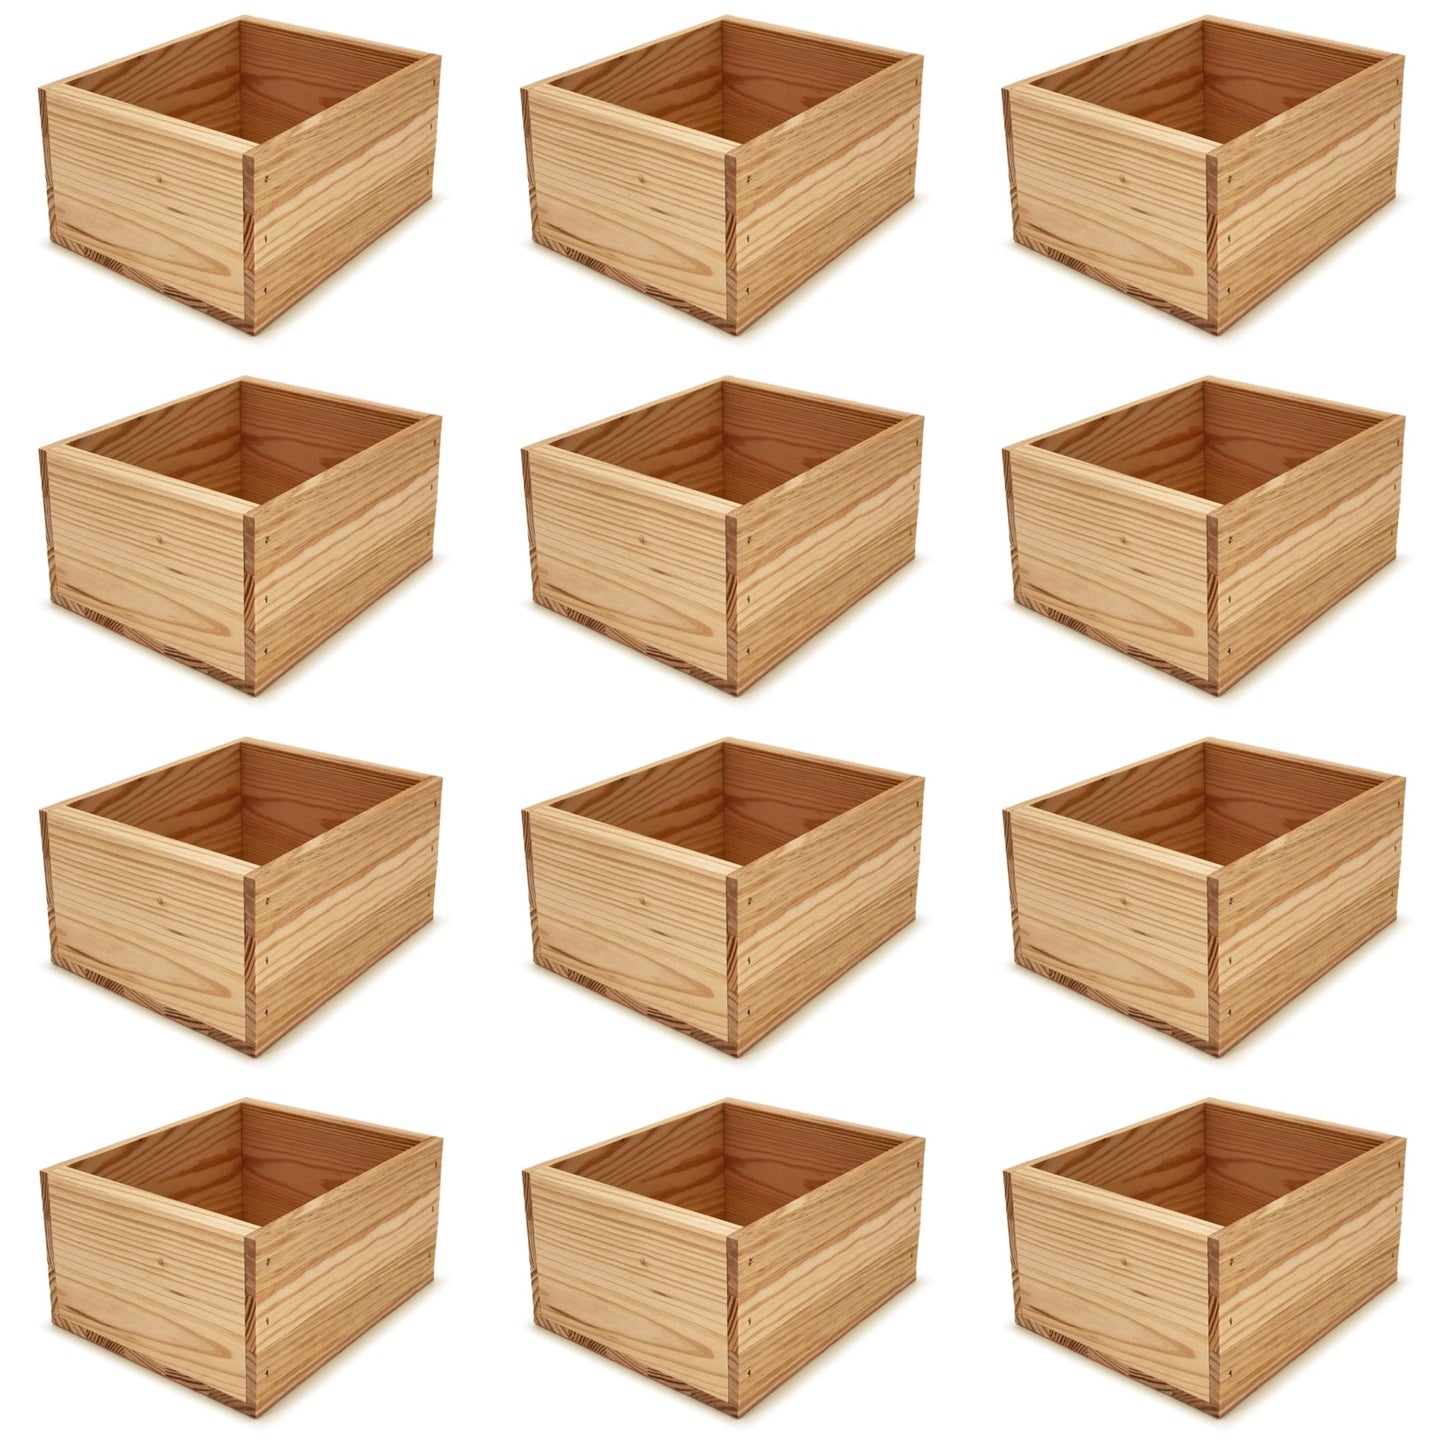 12 Small wooden crates 9x8x5.25